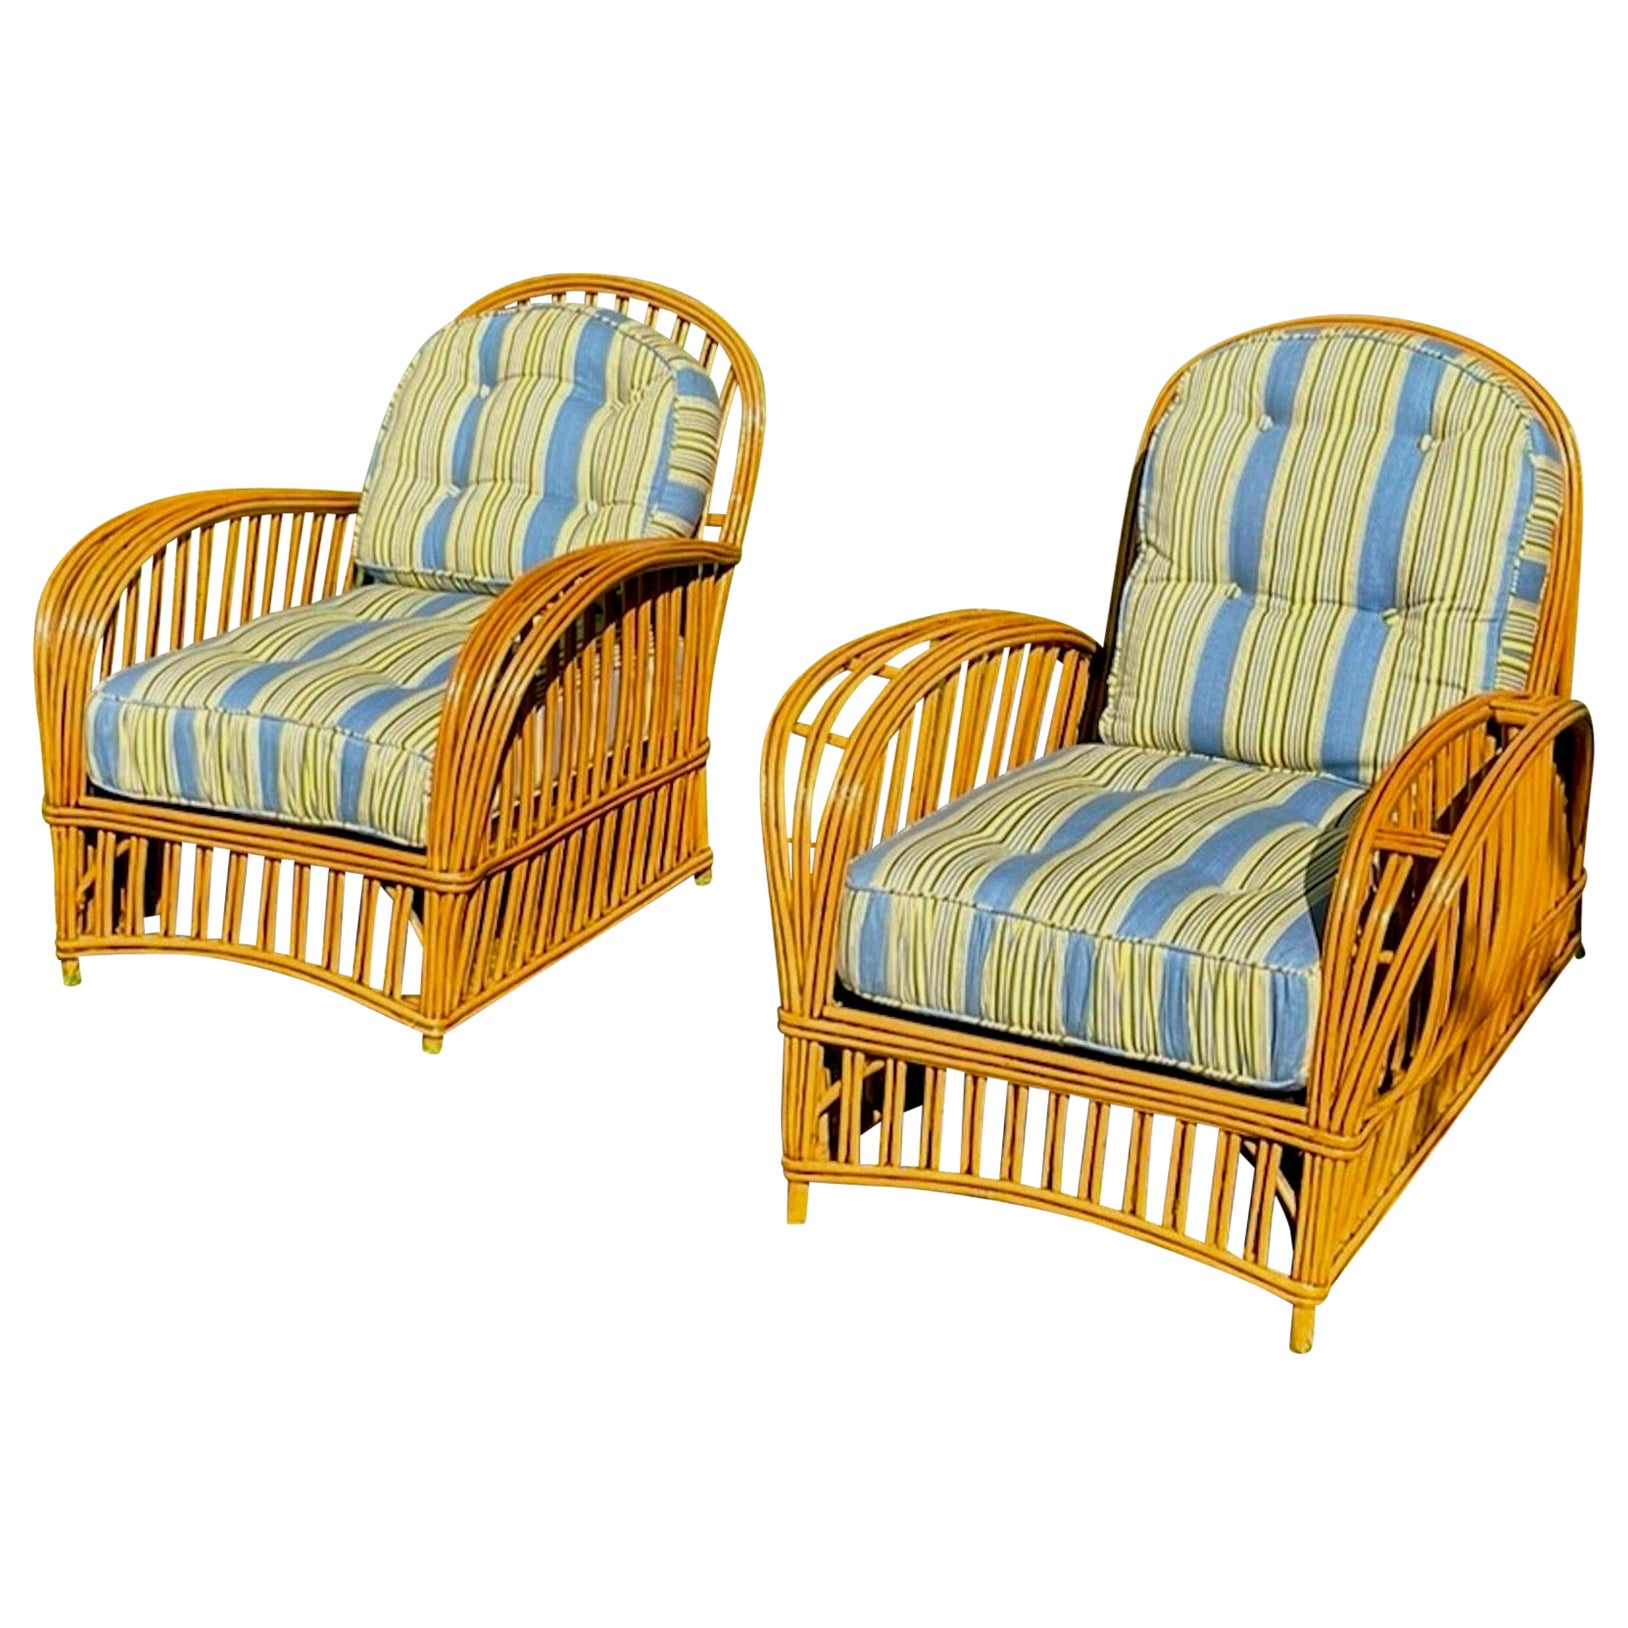 Pair of Heywood Wakefield Deco Rattan Ladies and Gents Chairs in Natural Finish For Sale